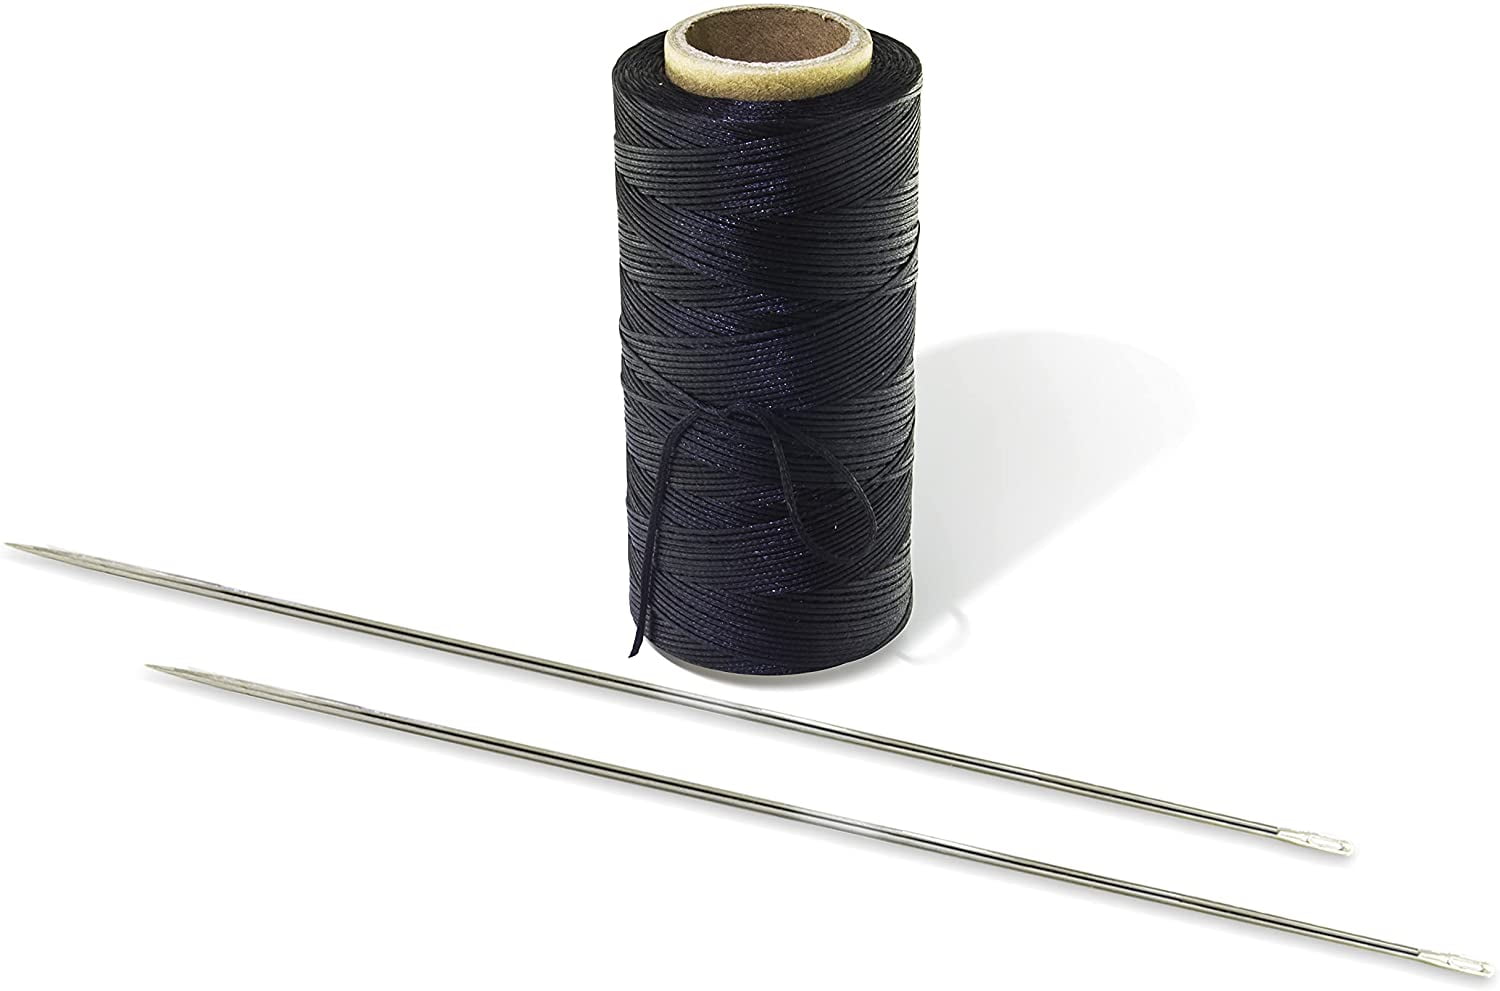 12 2 pcs Professional Upholstery Large Eye Long Needle,Easy to Thread,with  1 roll 284 Yard 150D 1mm-Width Leather Sewing Waxed Thread,Black.(12 inch X  2 Thread X 1) 